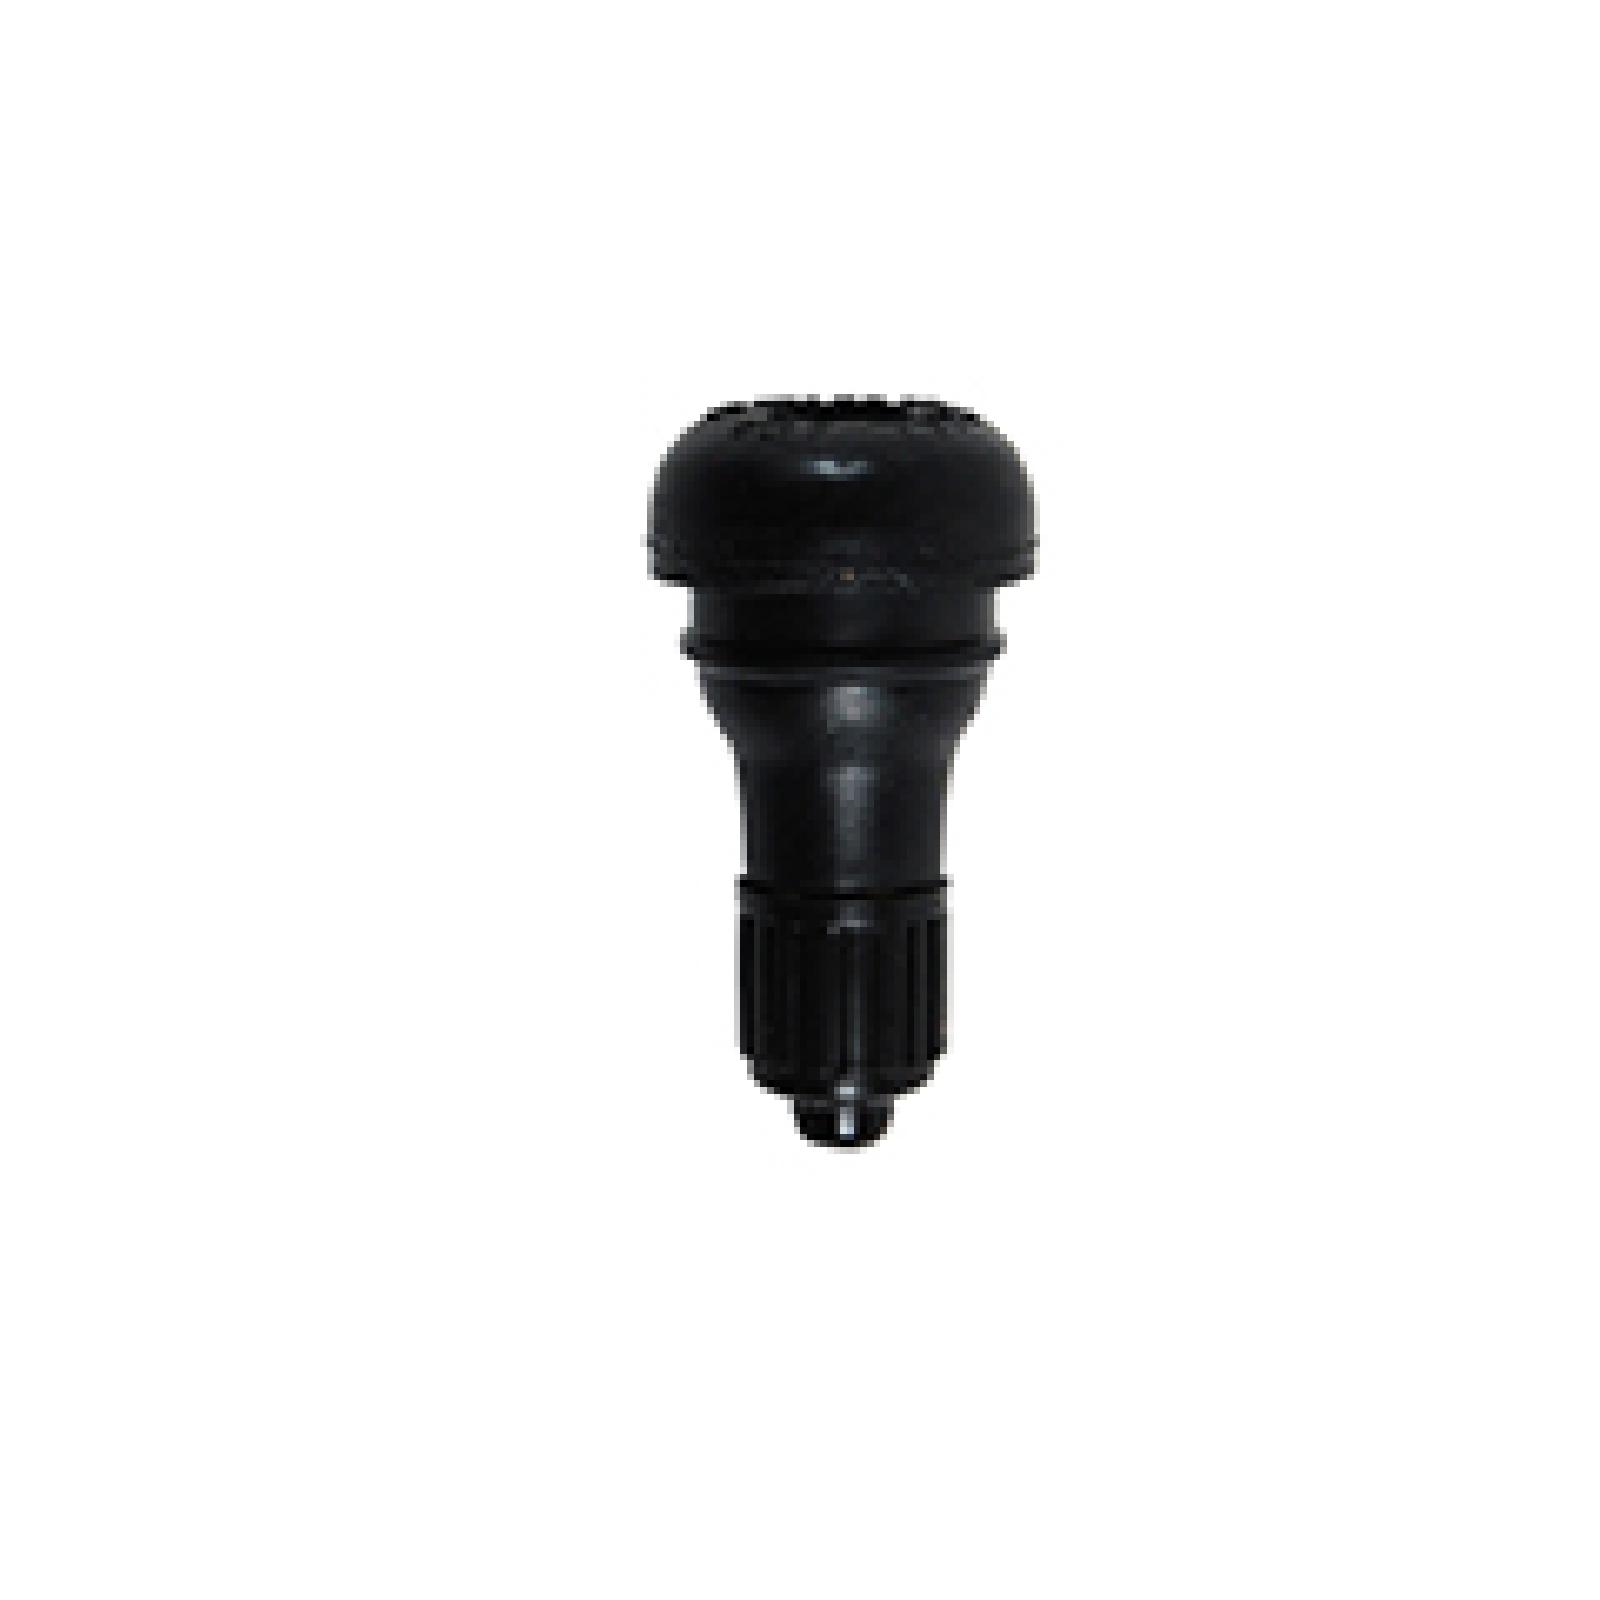 VALVE TUBELESS AIR part# 934-0255 by MTD